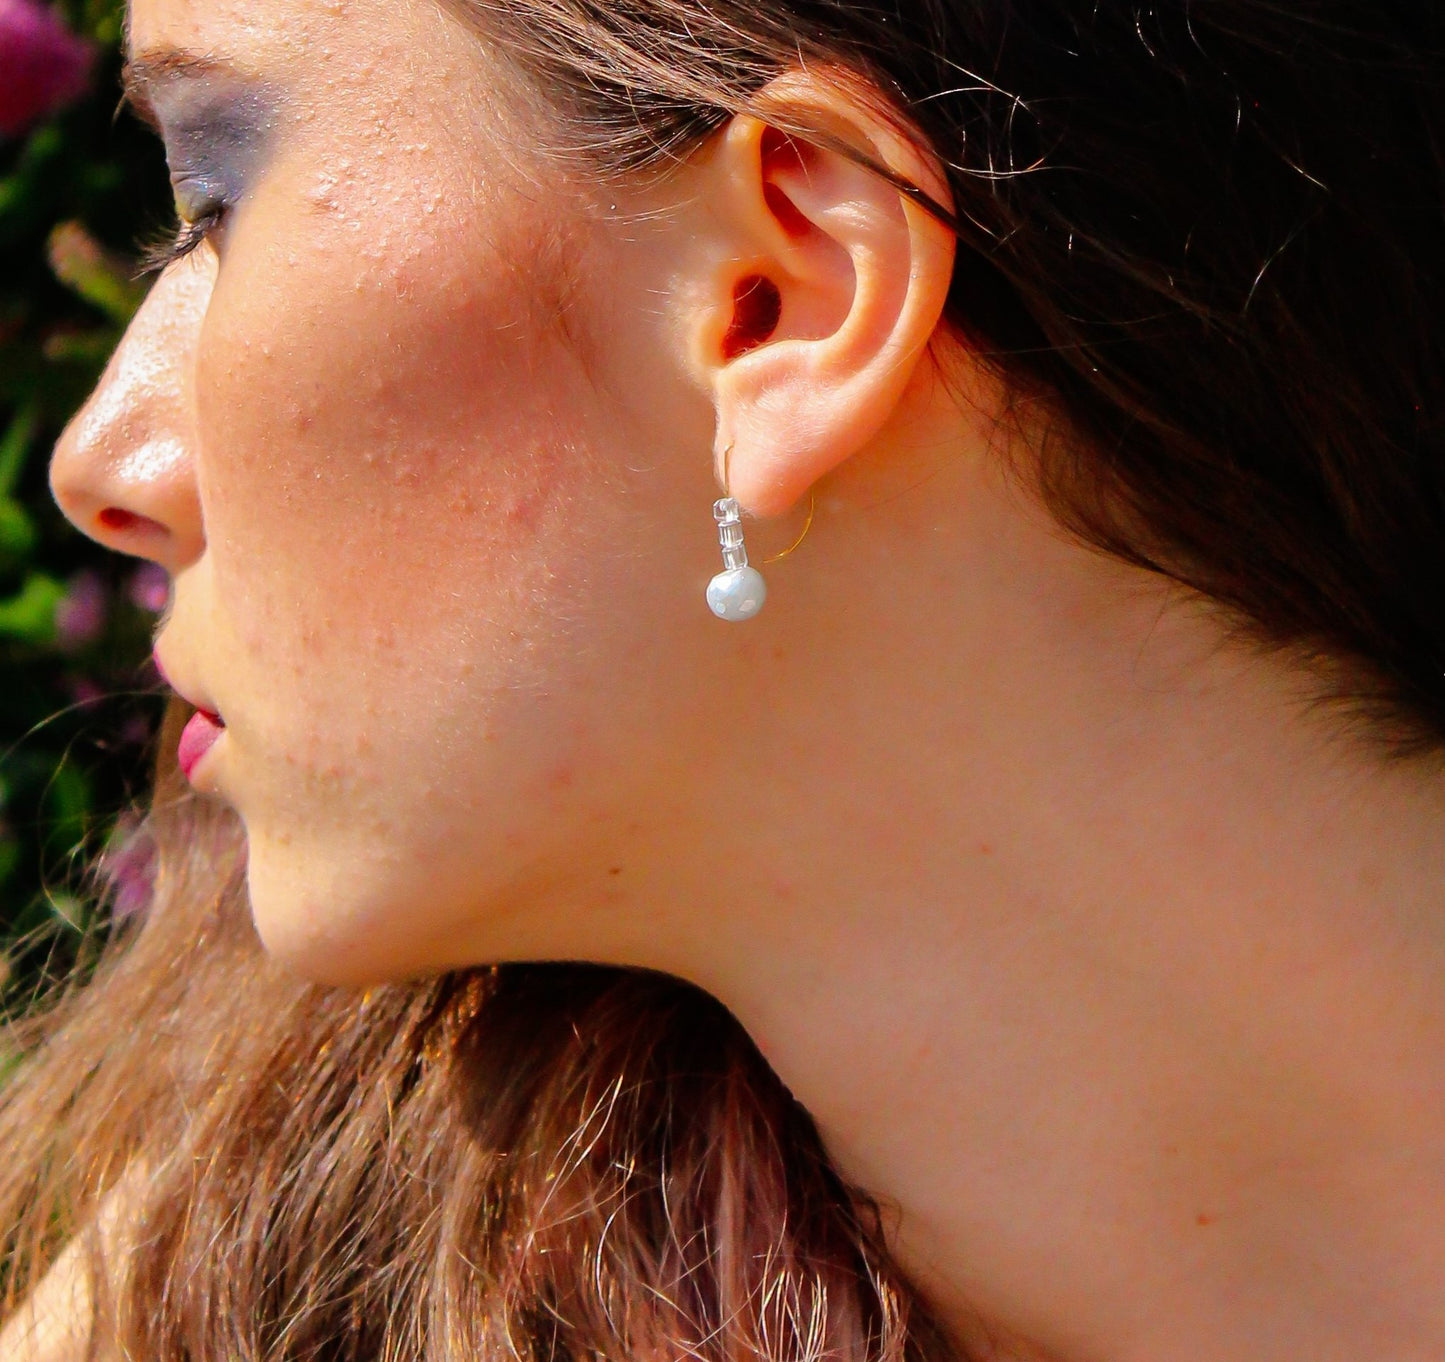 Short Curve Earrings with Grey Mystic Chalcedony and Topaz (Pearl options)